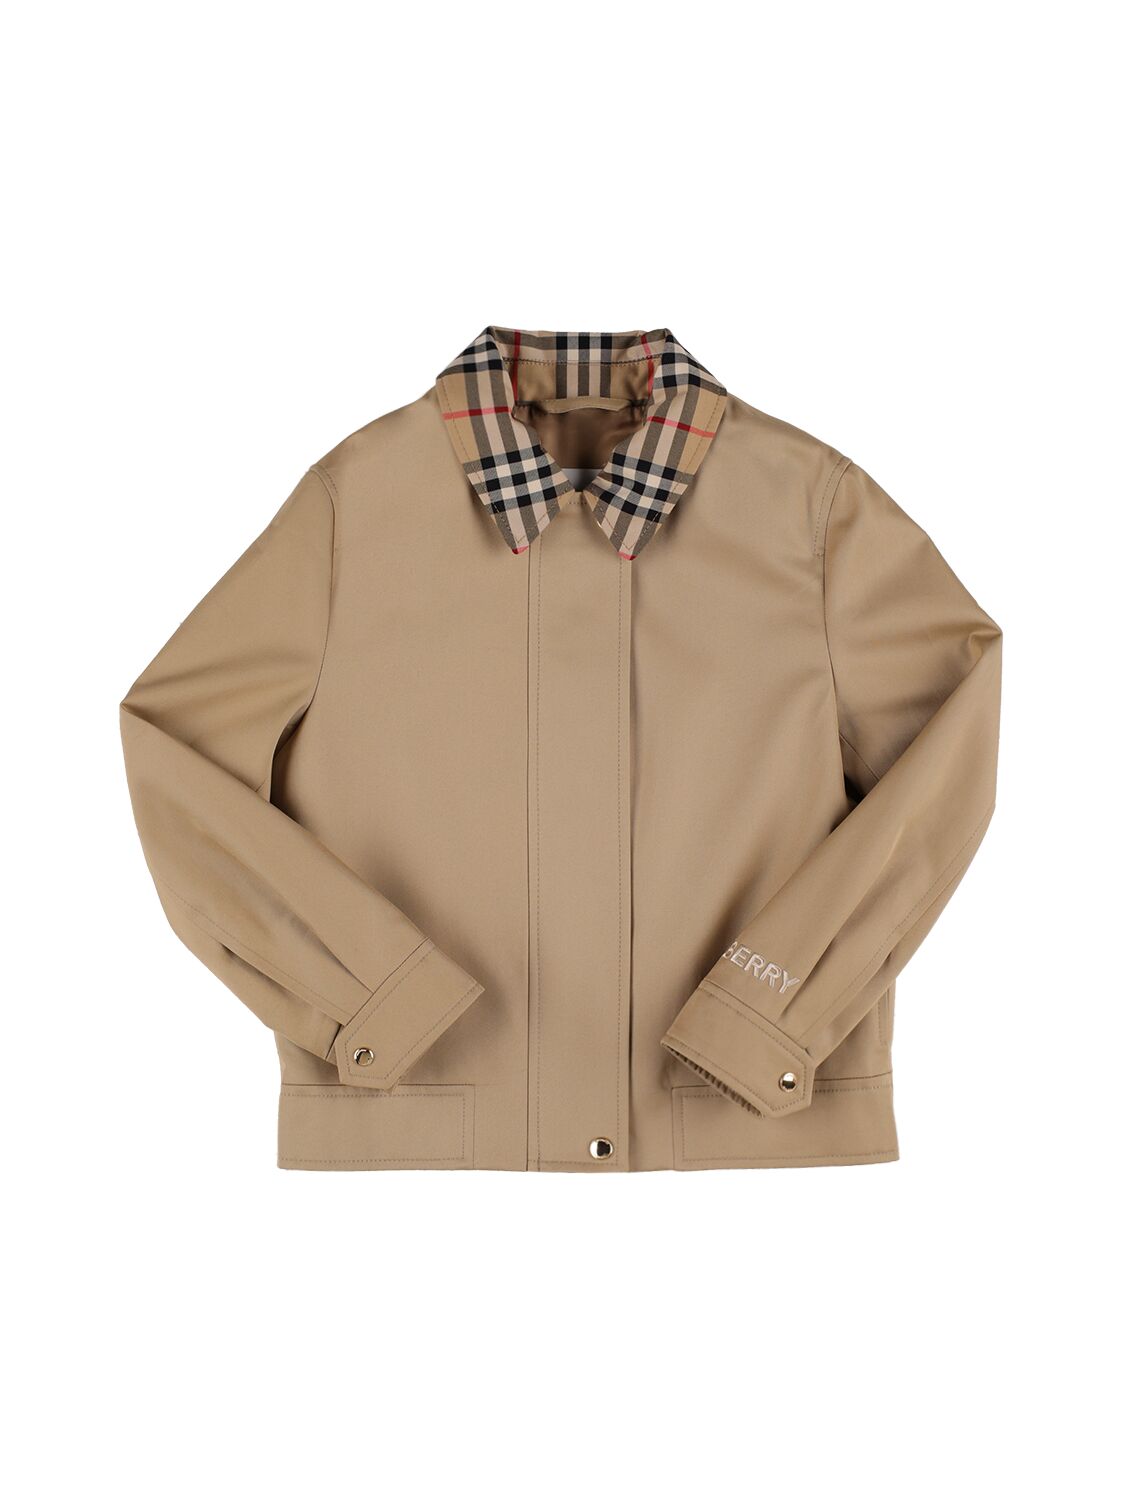 Burberry Kids' Cotton Jacket W/ Check Inserts In Beige